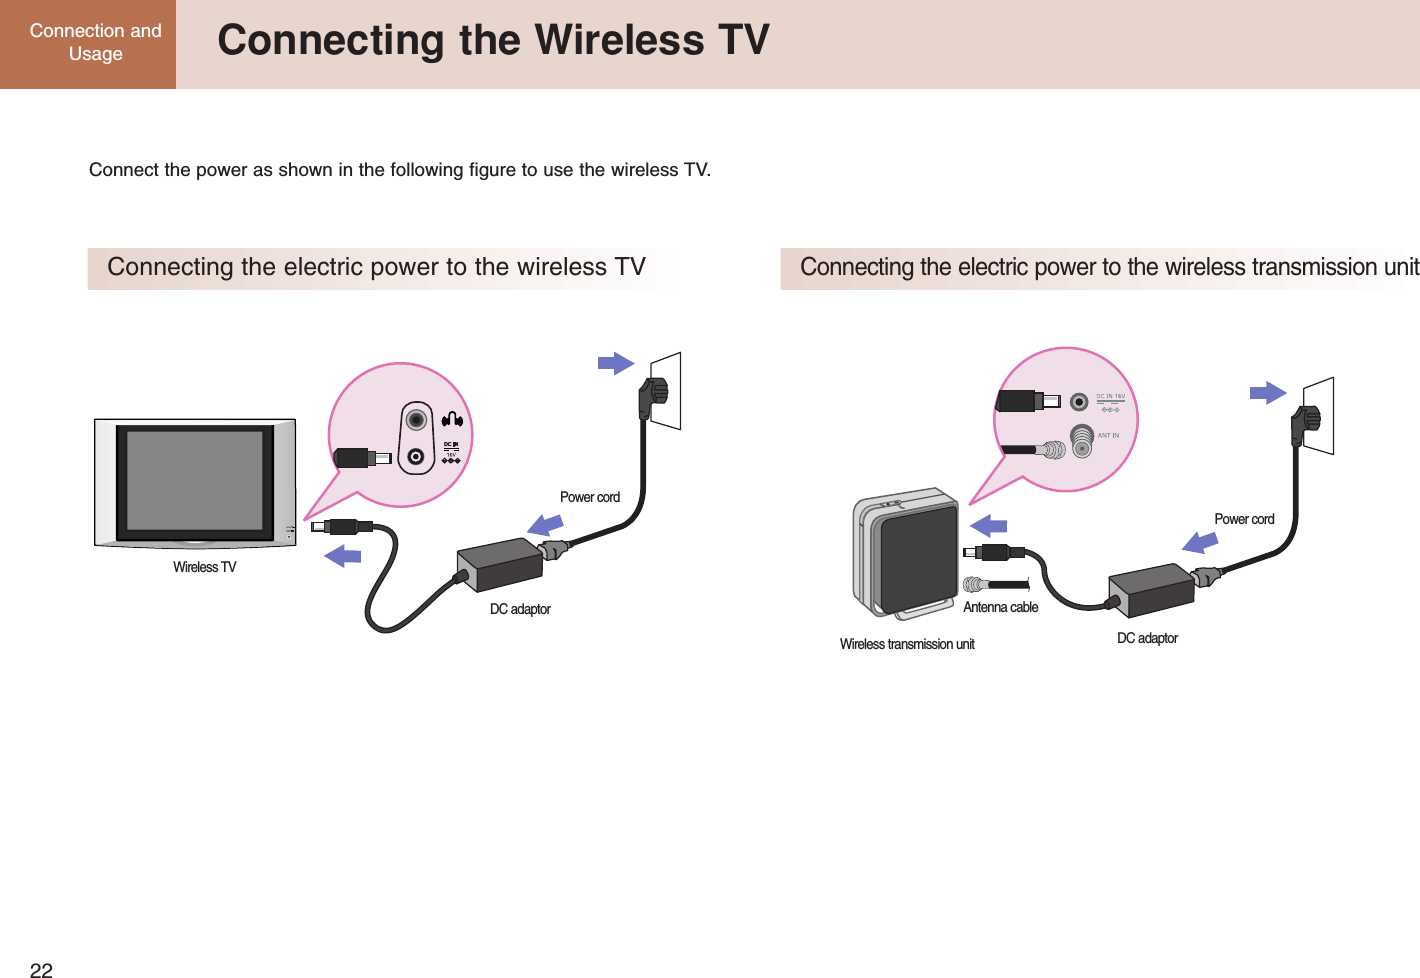 22Connection andUsage  Connecting the Wireless TVConnecting the electric power to the wireless TVConnecting the electric power to the wireless transmission unitConnect the power as shown in the following figure to use the wireless TV.Wireless TVDC adaptorPower cordWireless transmission unit DC adaptorPOWERPower cordAntenna cable